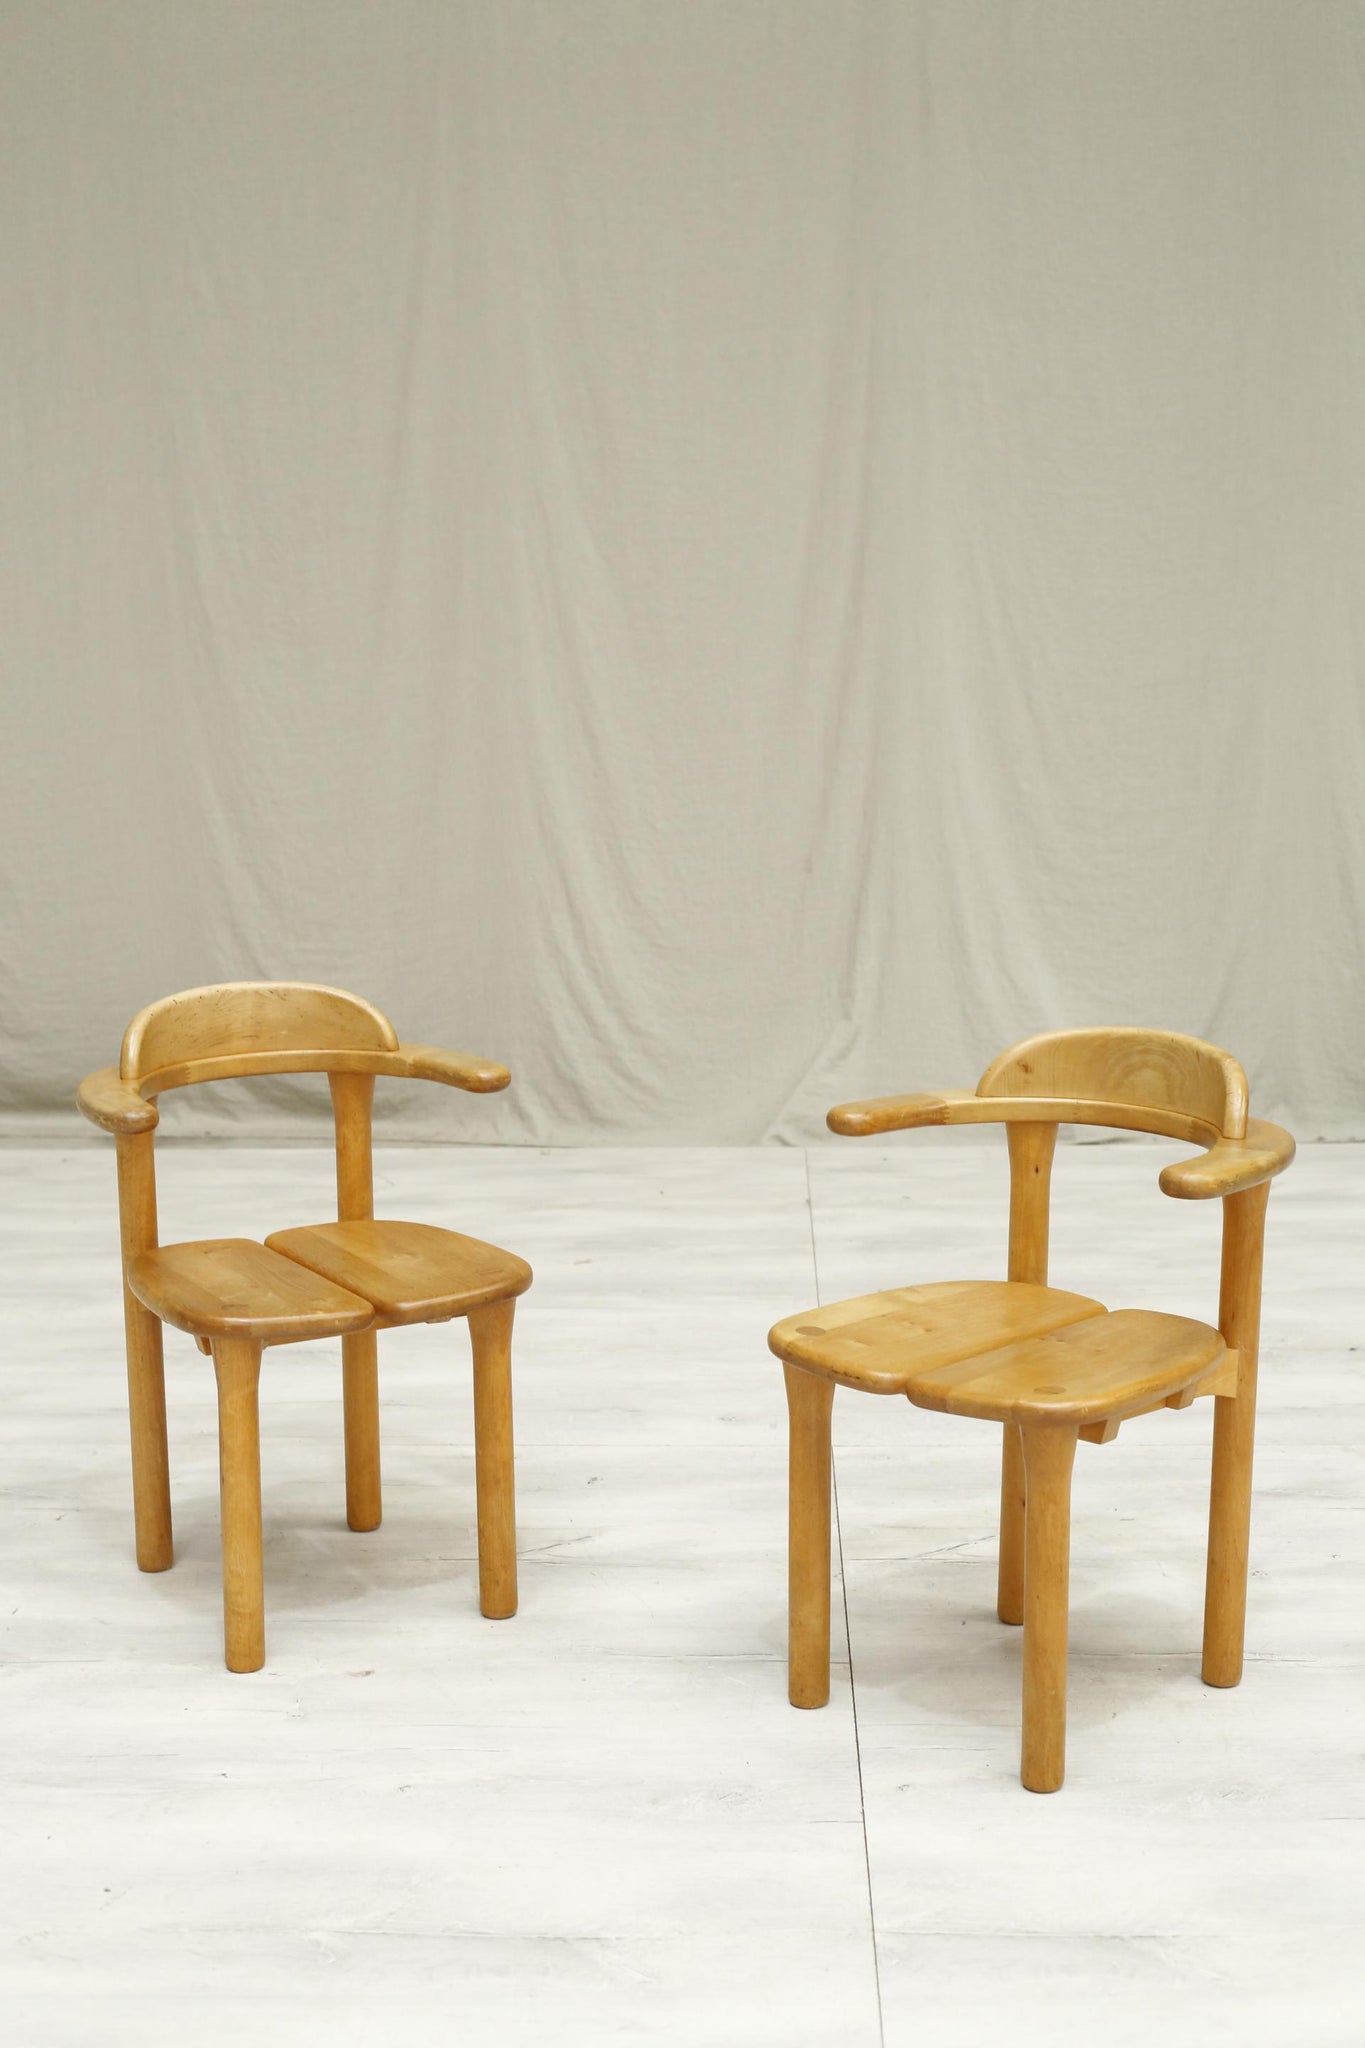 Pair of 1980's desk chairs by Austrian design company team 7